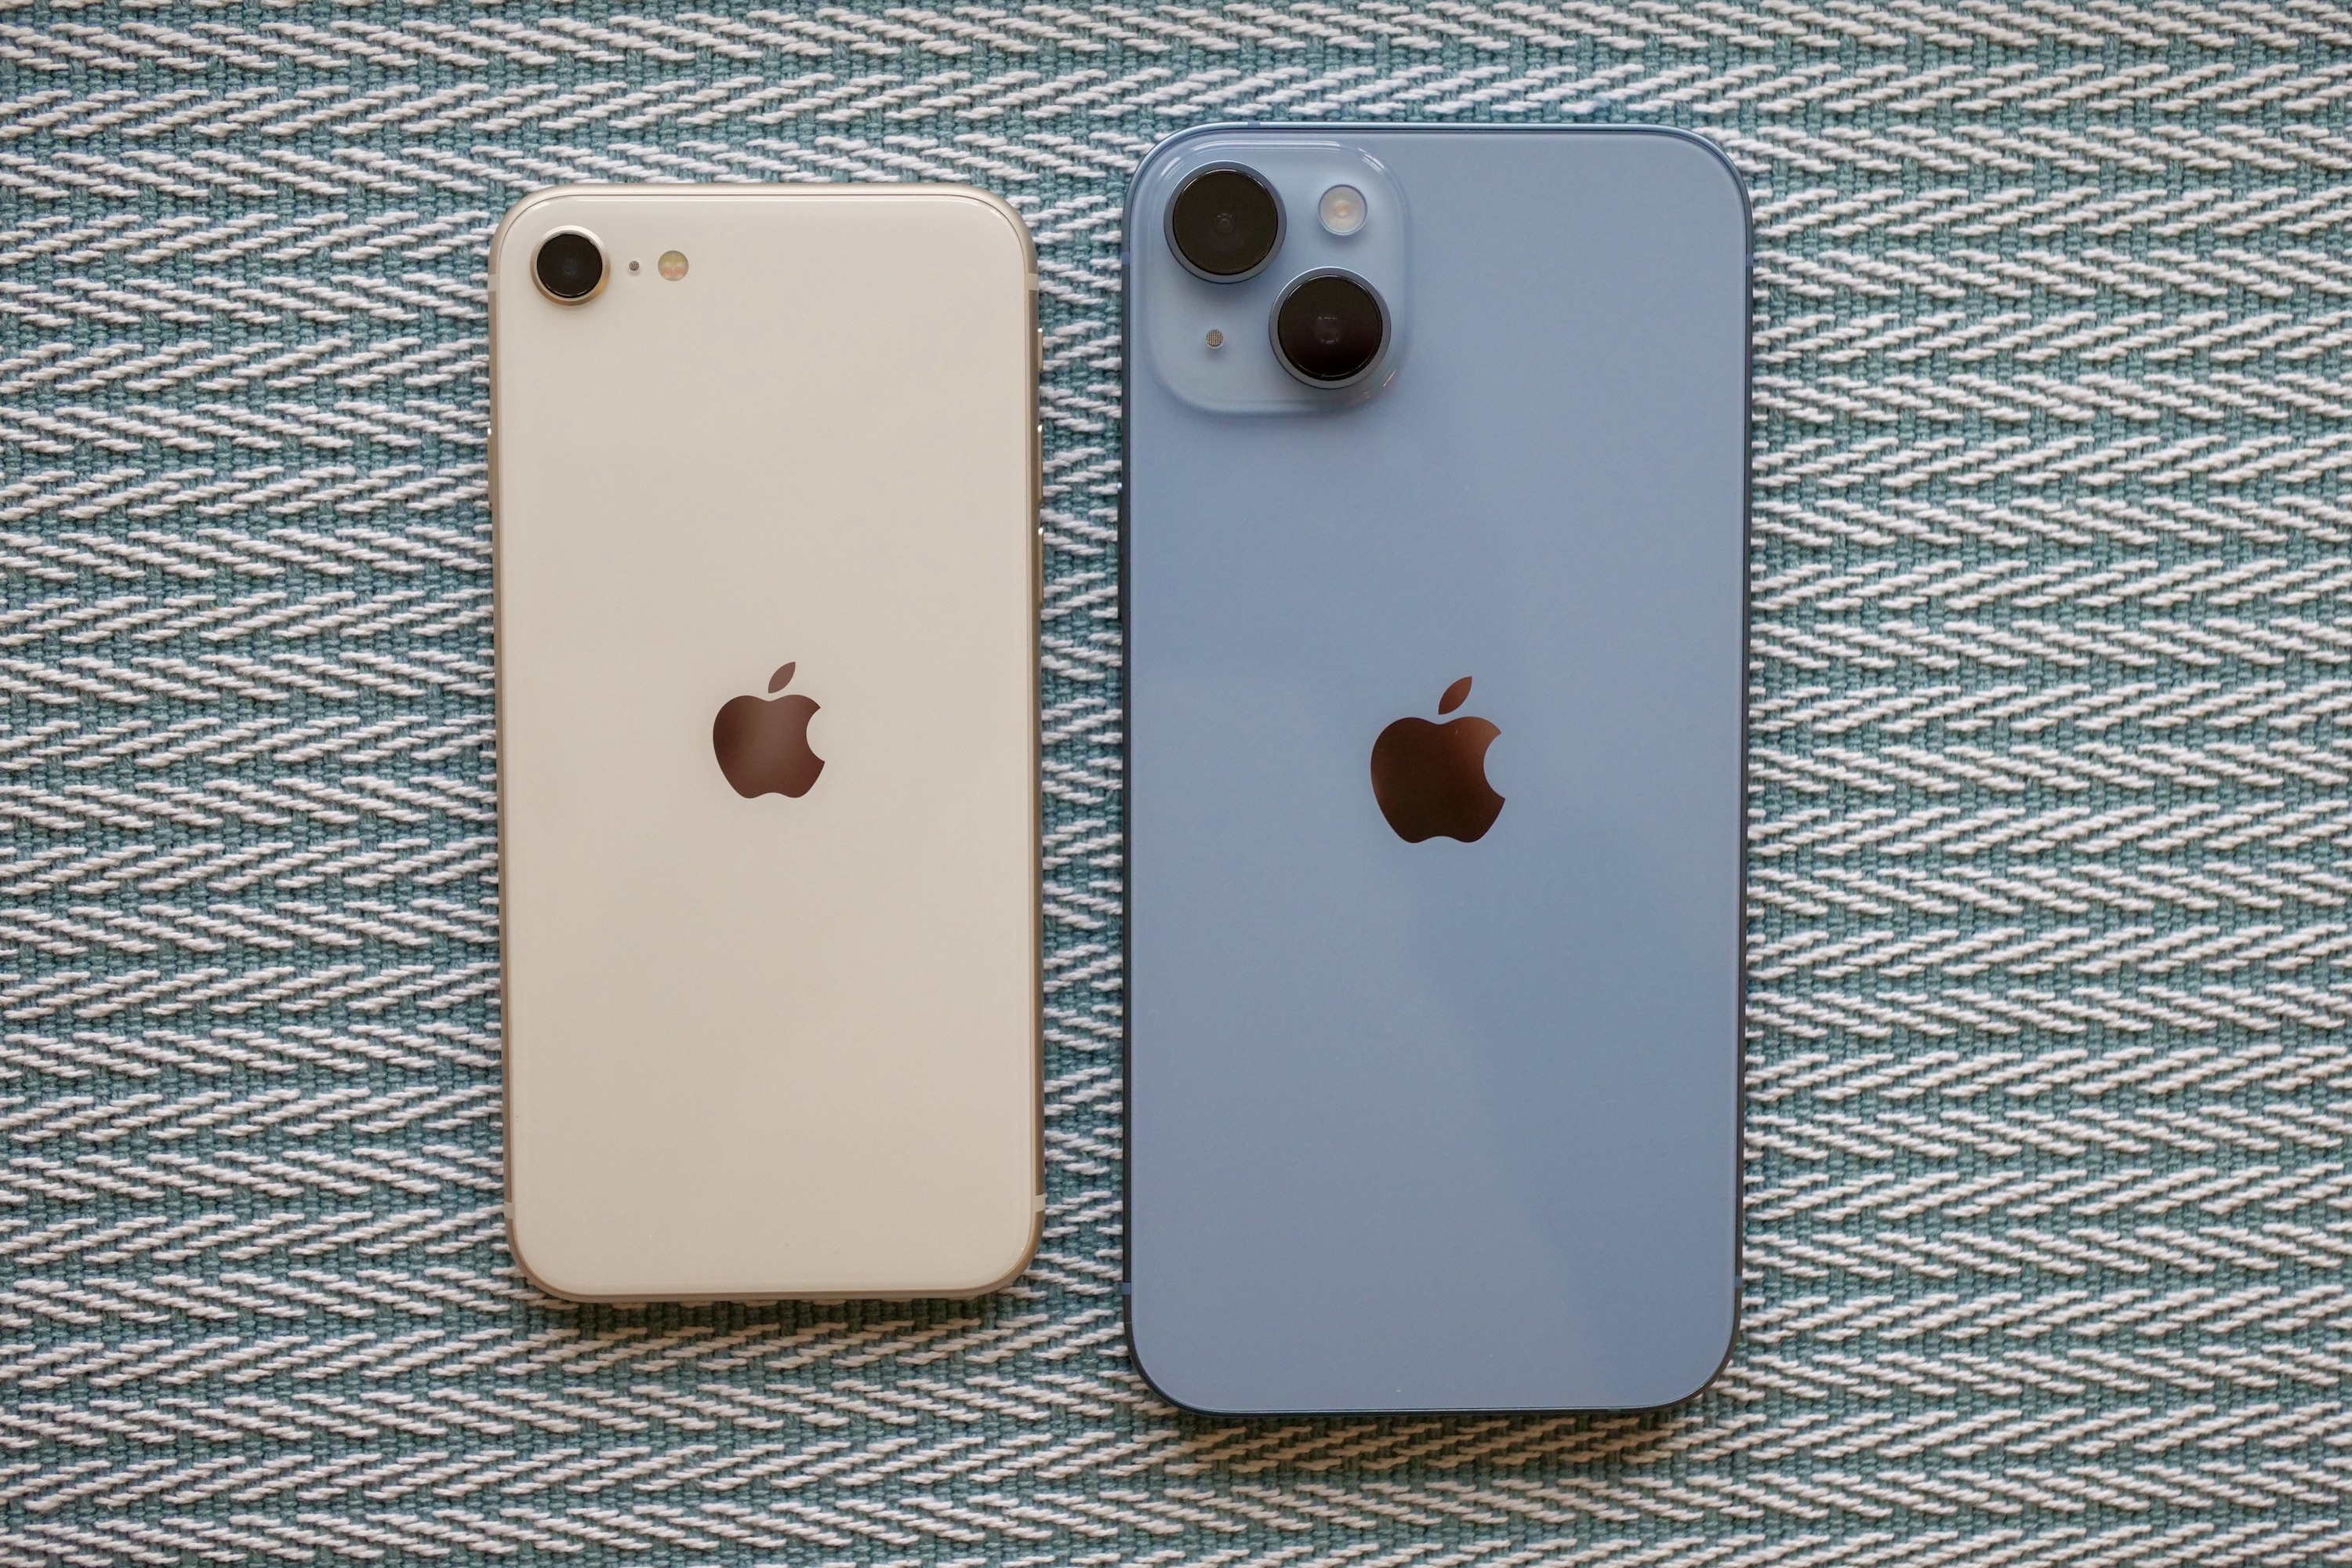 iPhone SE (2022) Vs. iPhone 12: Comparison Guide to Help You Decide